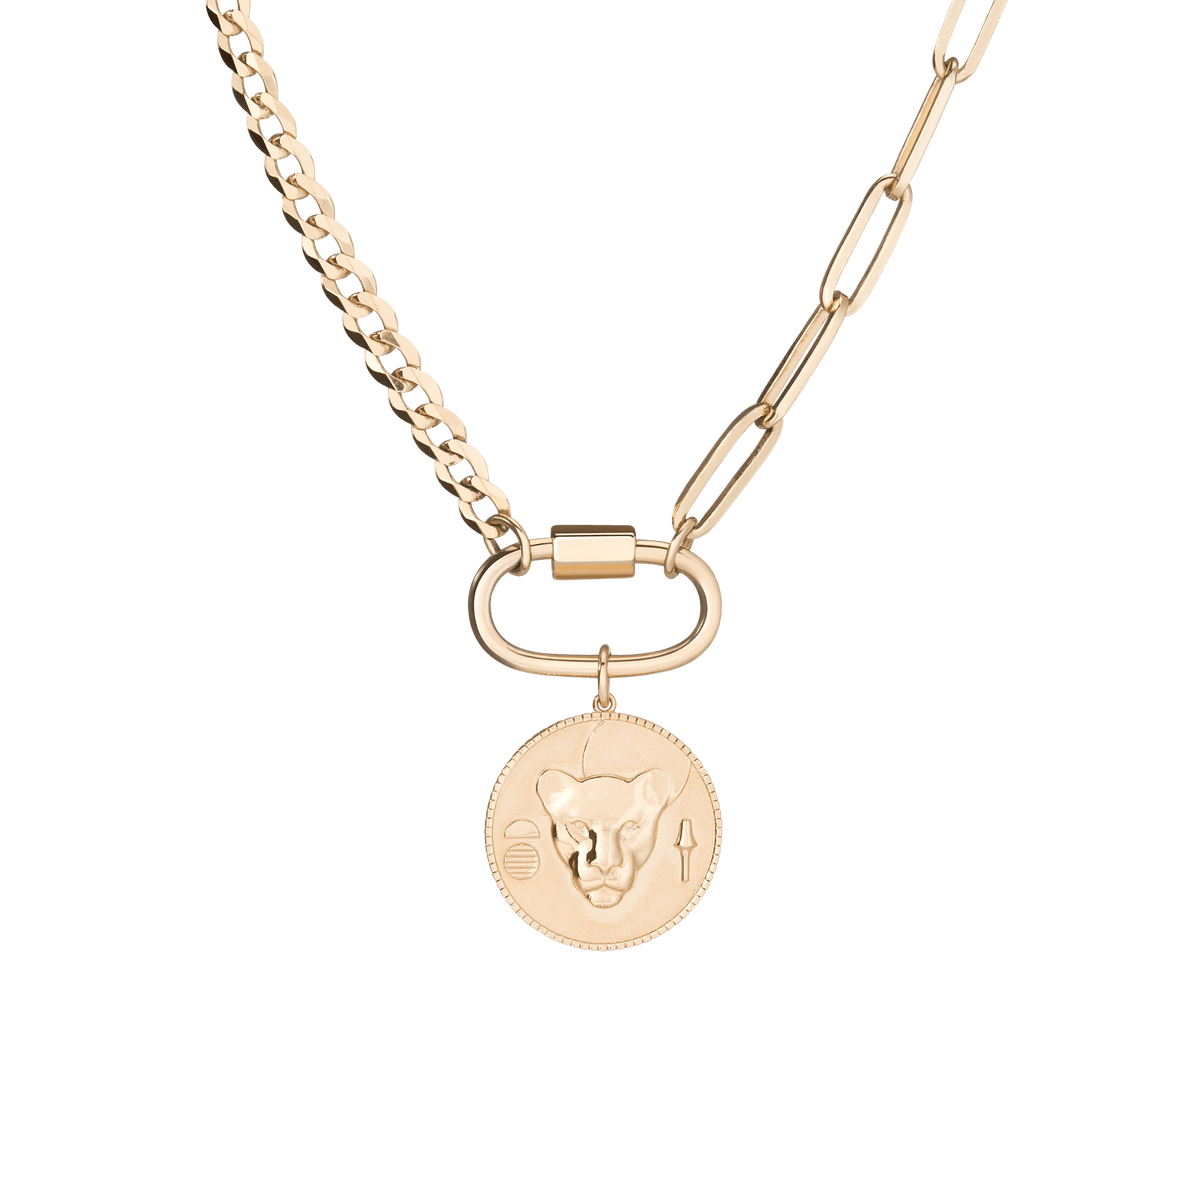 Jamaican Hand Cut Coin Pendant and Necklace